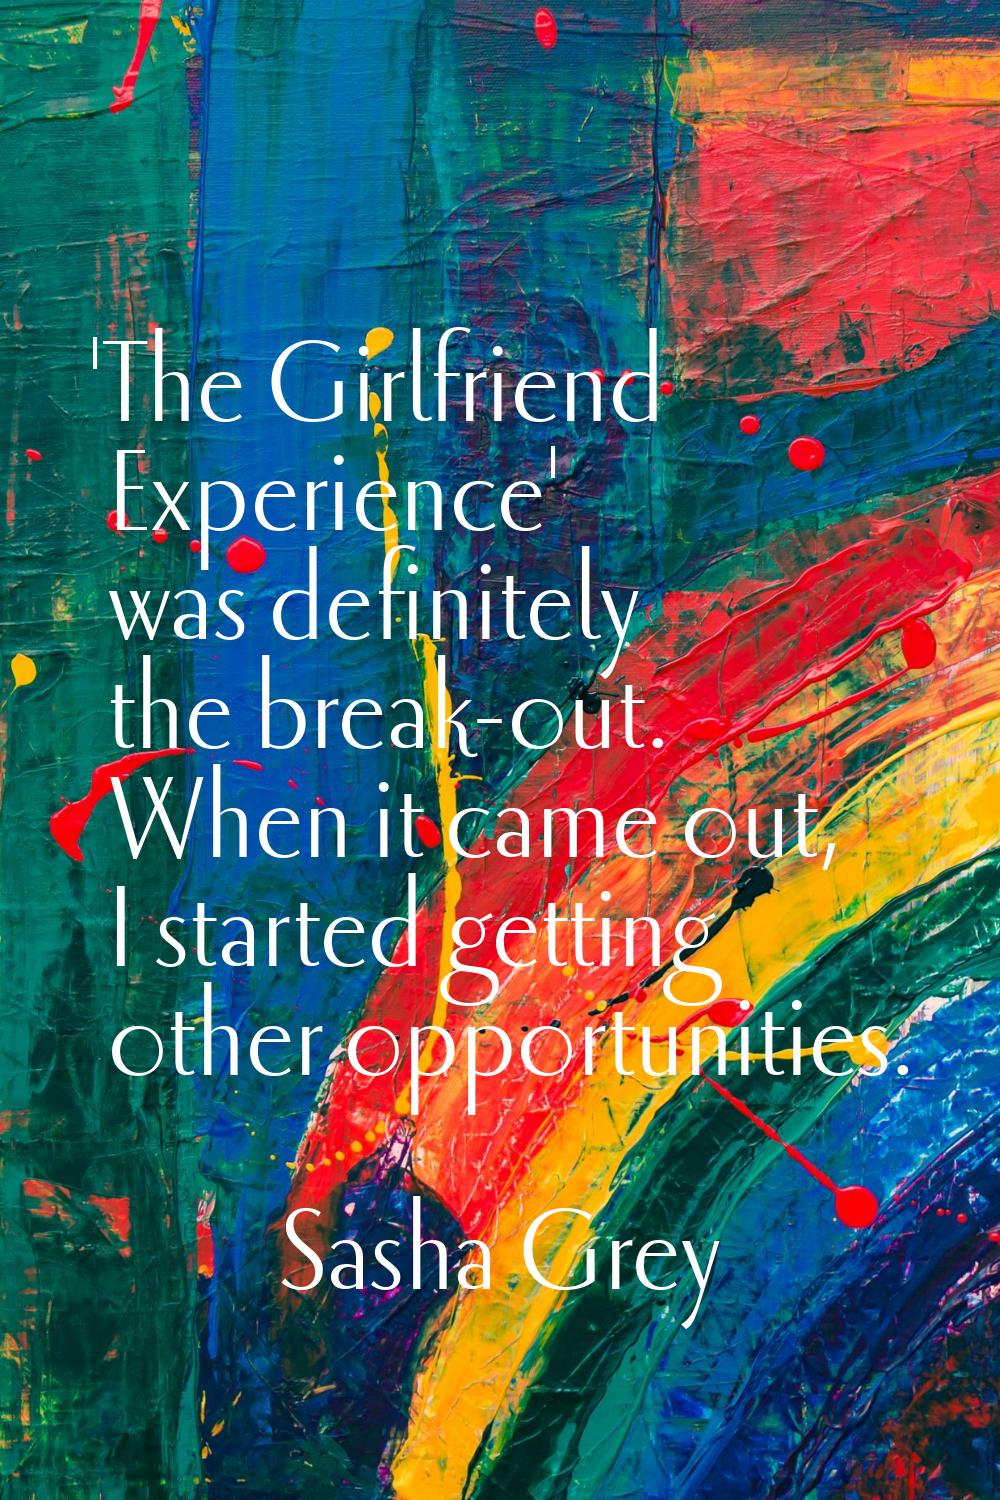 'The Girlfriend Experience' was definitely the break-out. When it came out, I started getting other